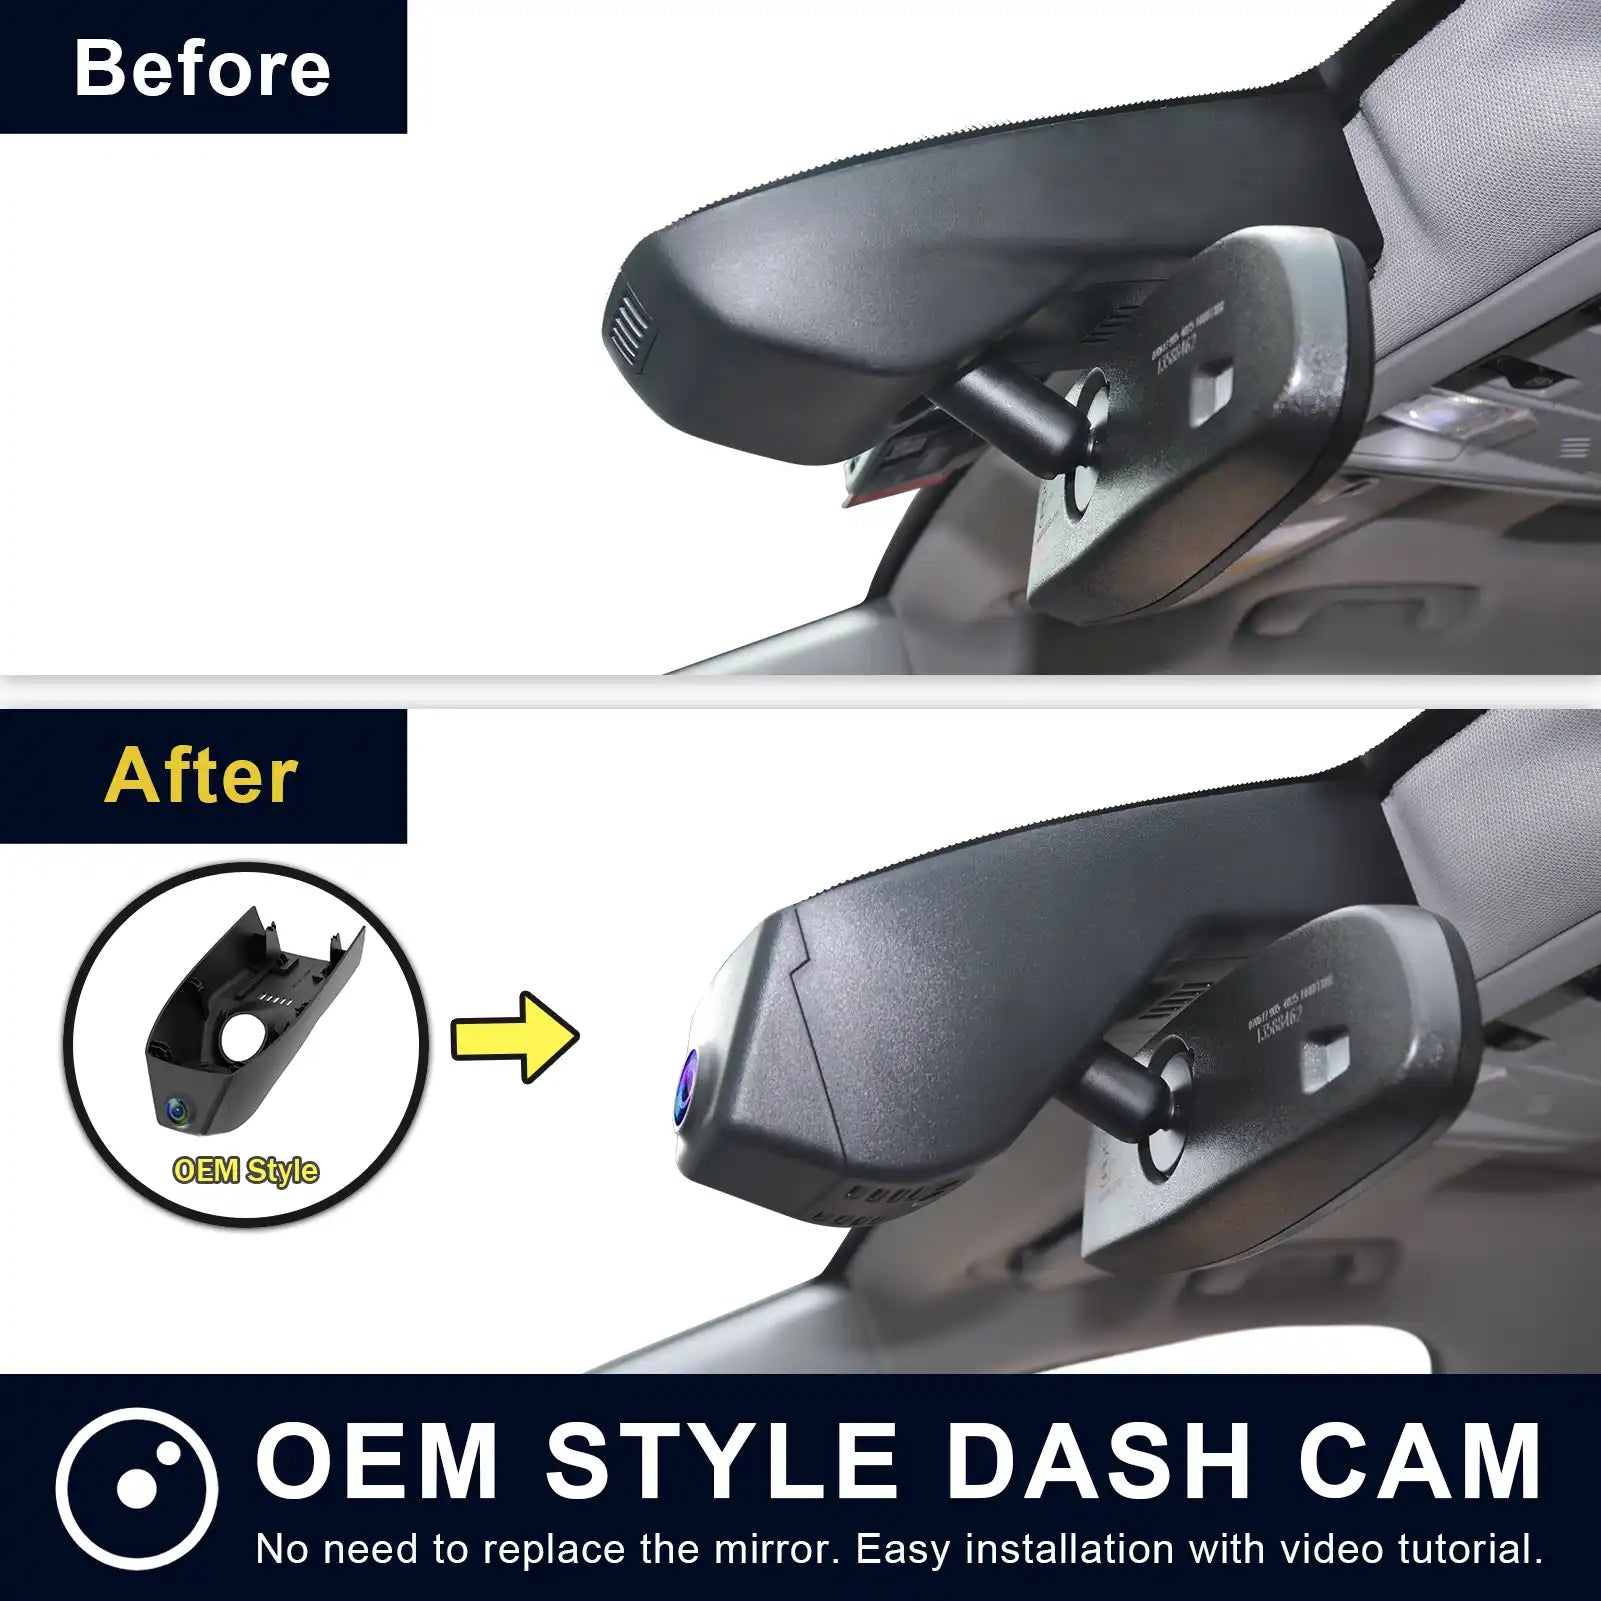 Buick Enclave dash cam Model before & after installation 